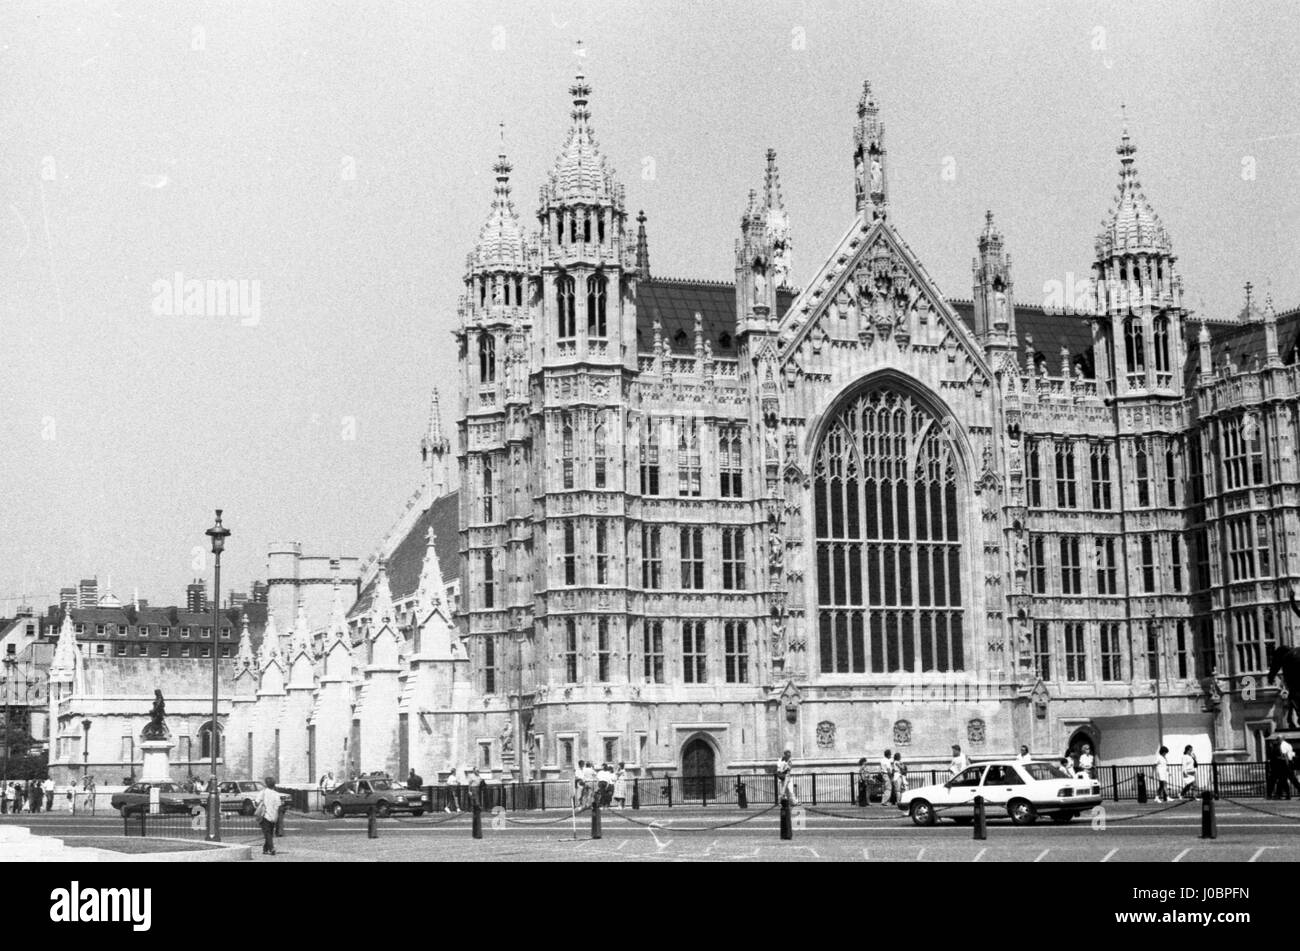 Exterior view of the Houses of Parliament at Westminster in London, England on August 5, 1989. Stock Photo